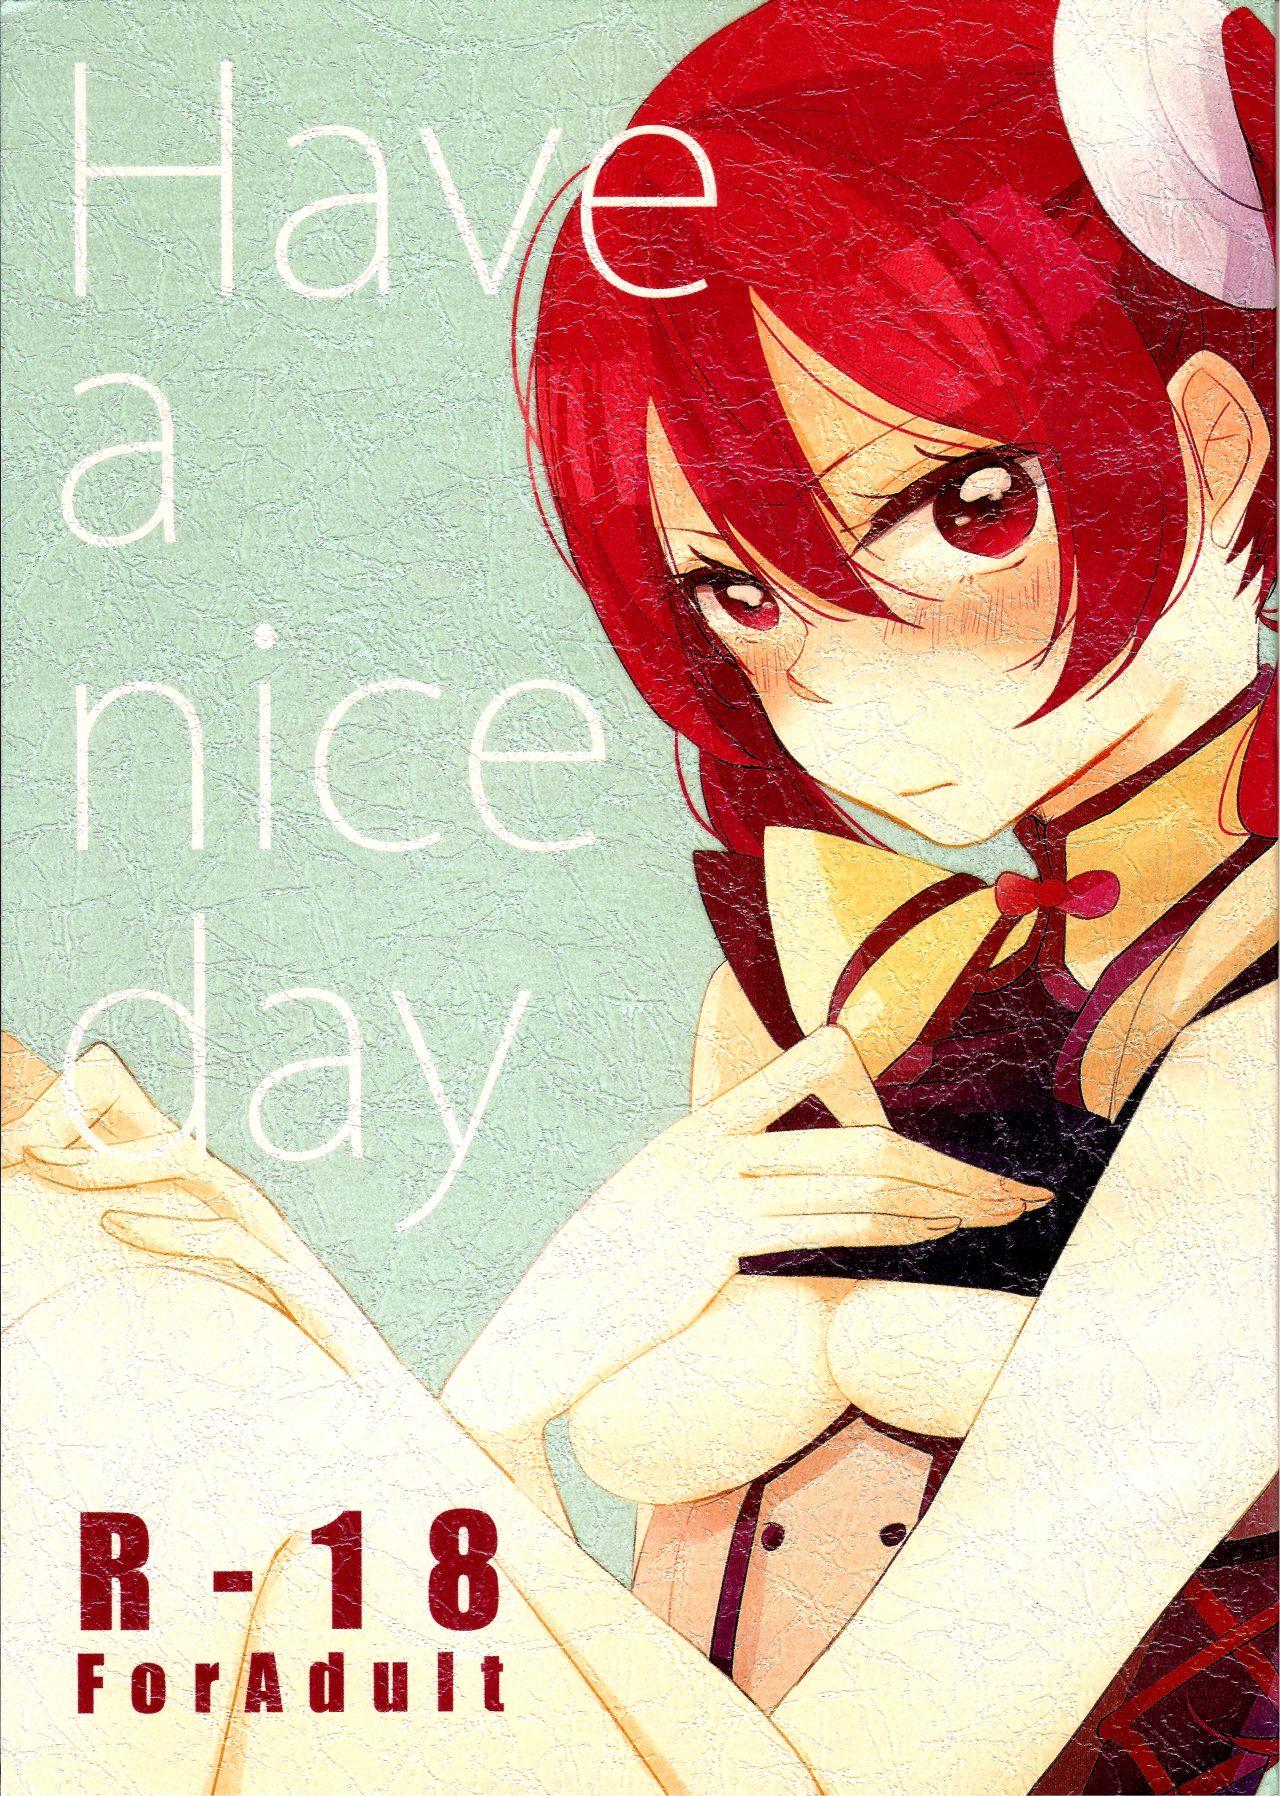 Have a nice day 0